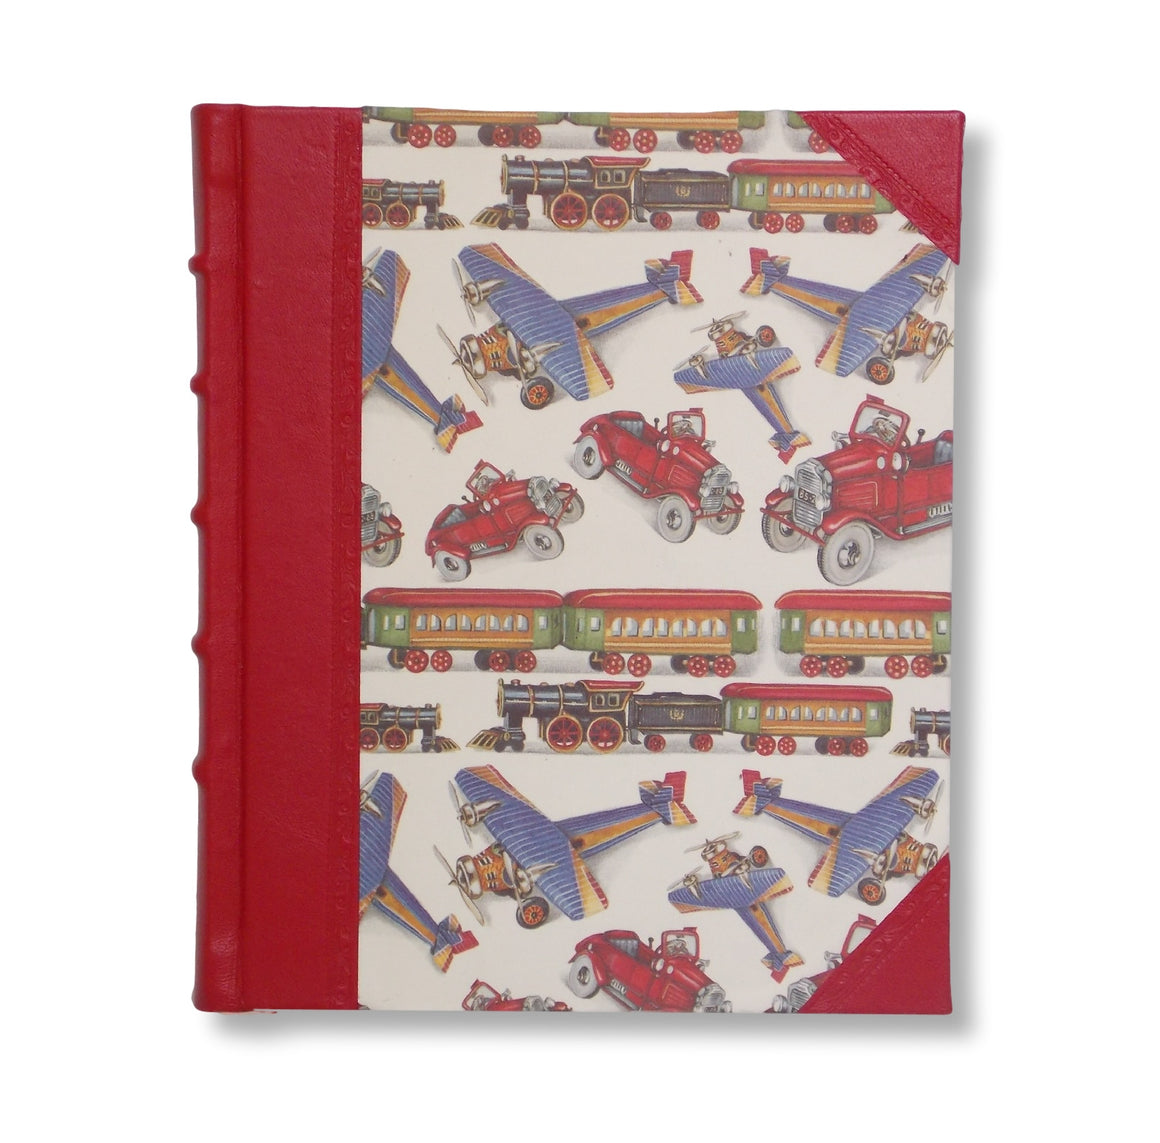 Red leather kids photo album - planes, trains and automobiles